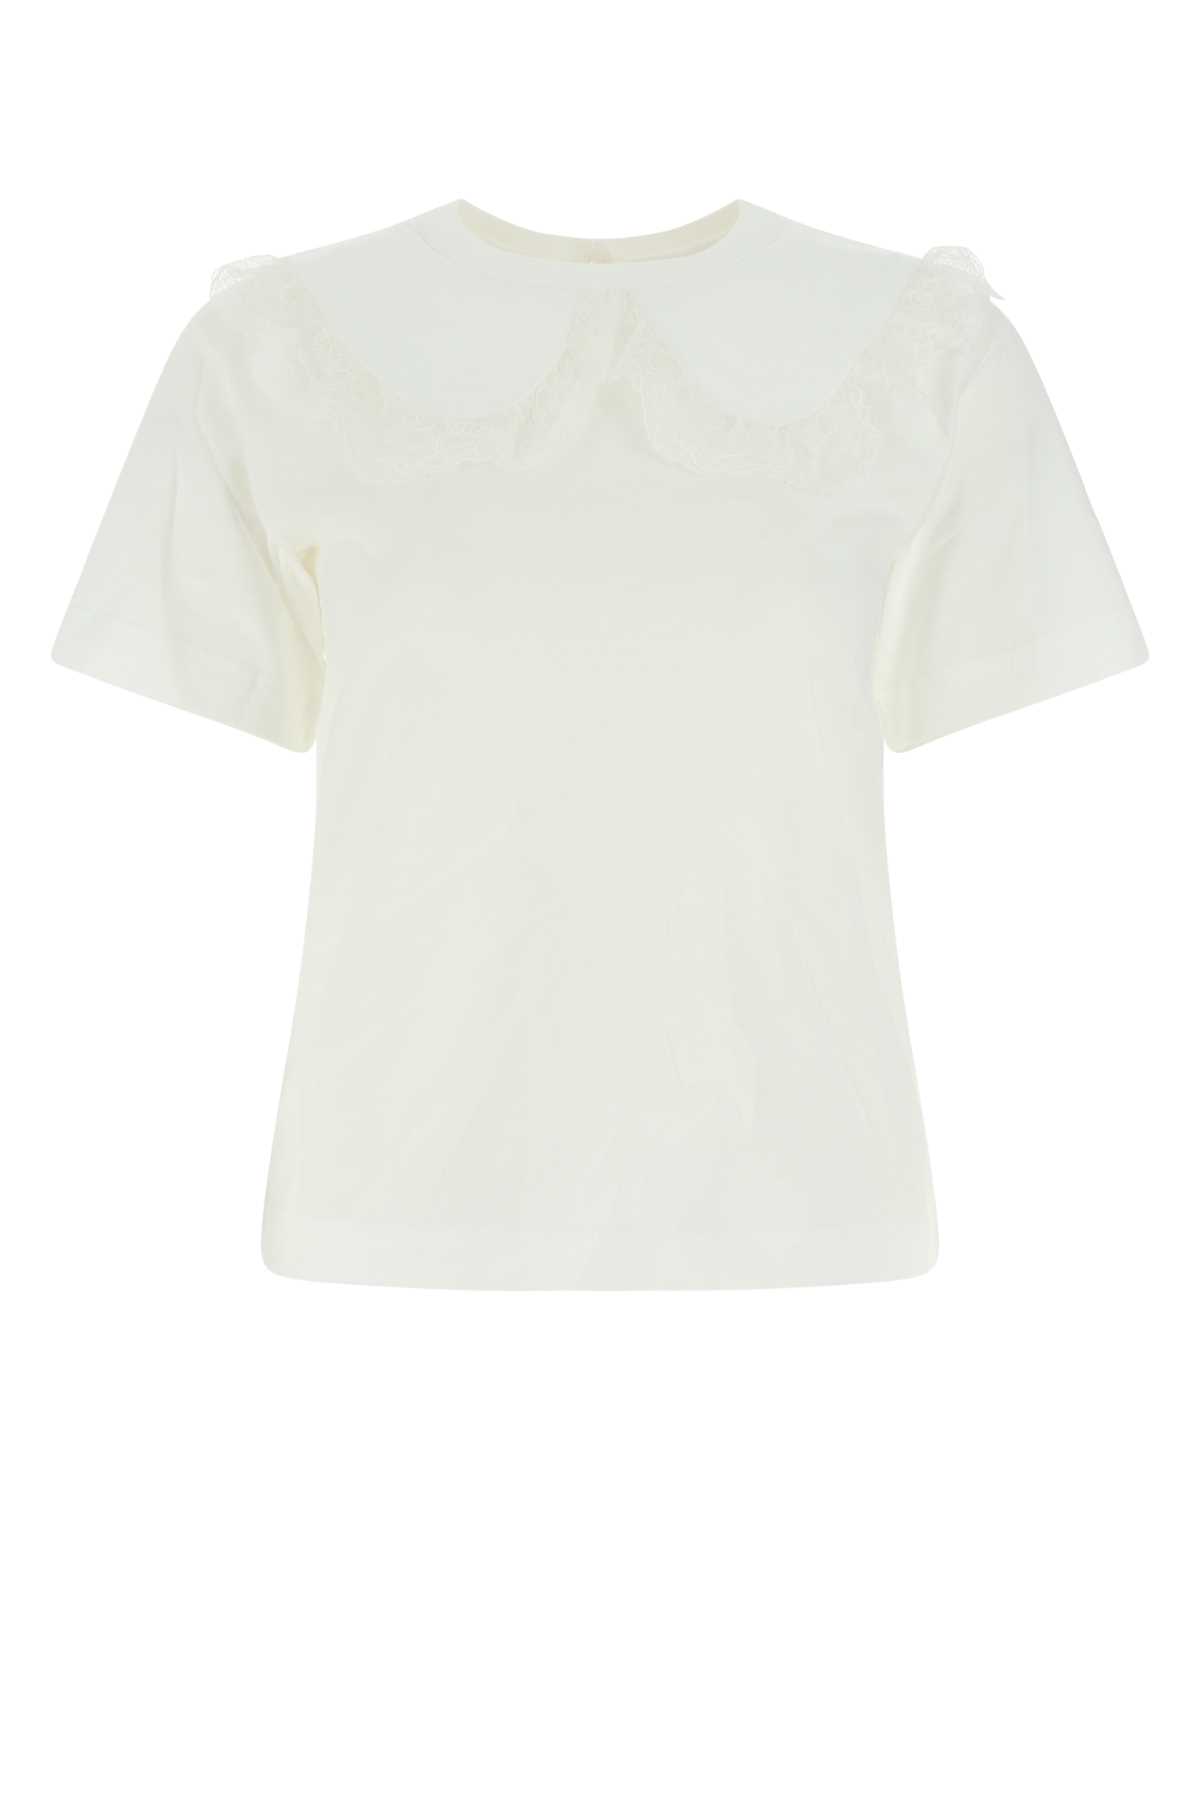 See by Chloé White Cotton T-shirt